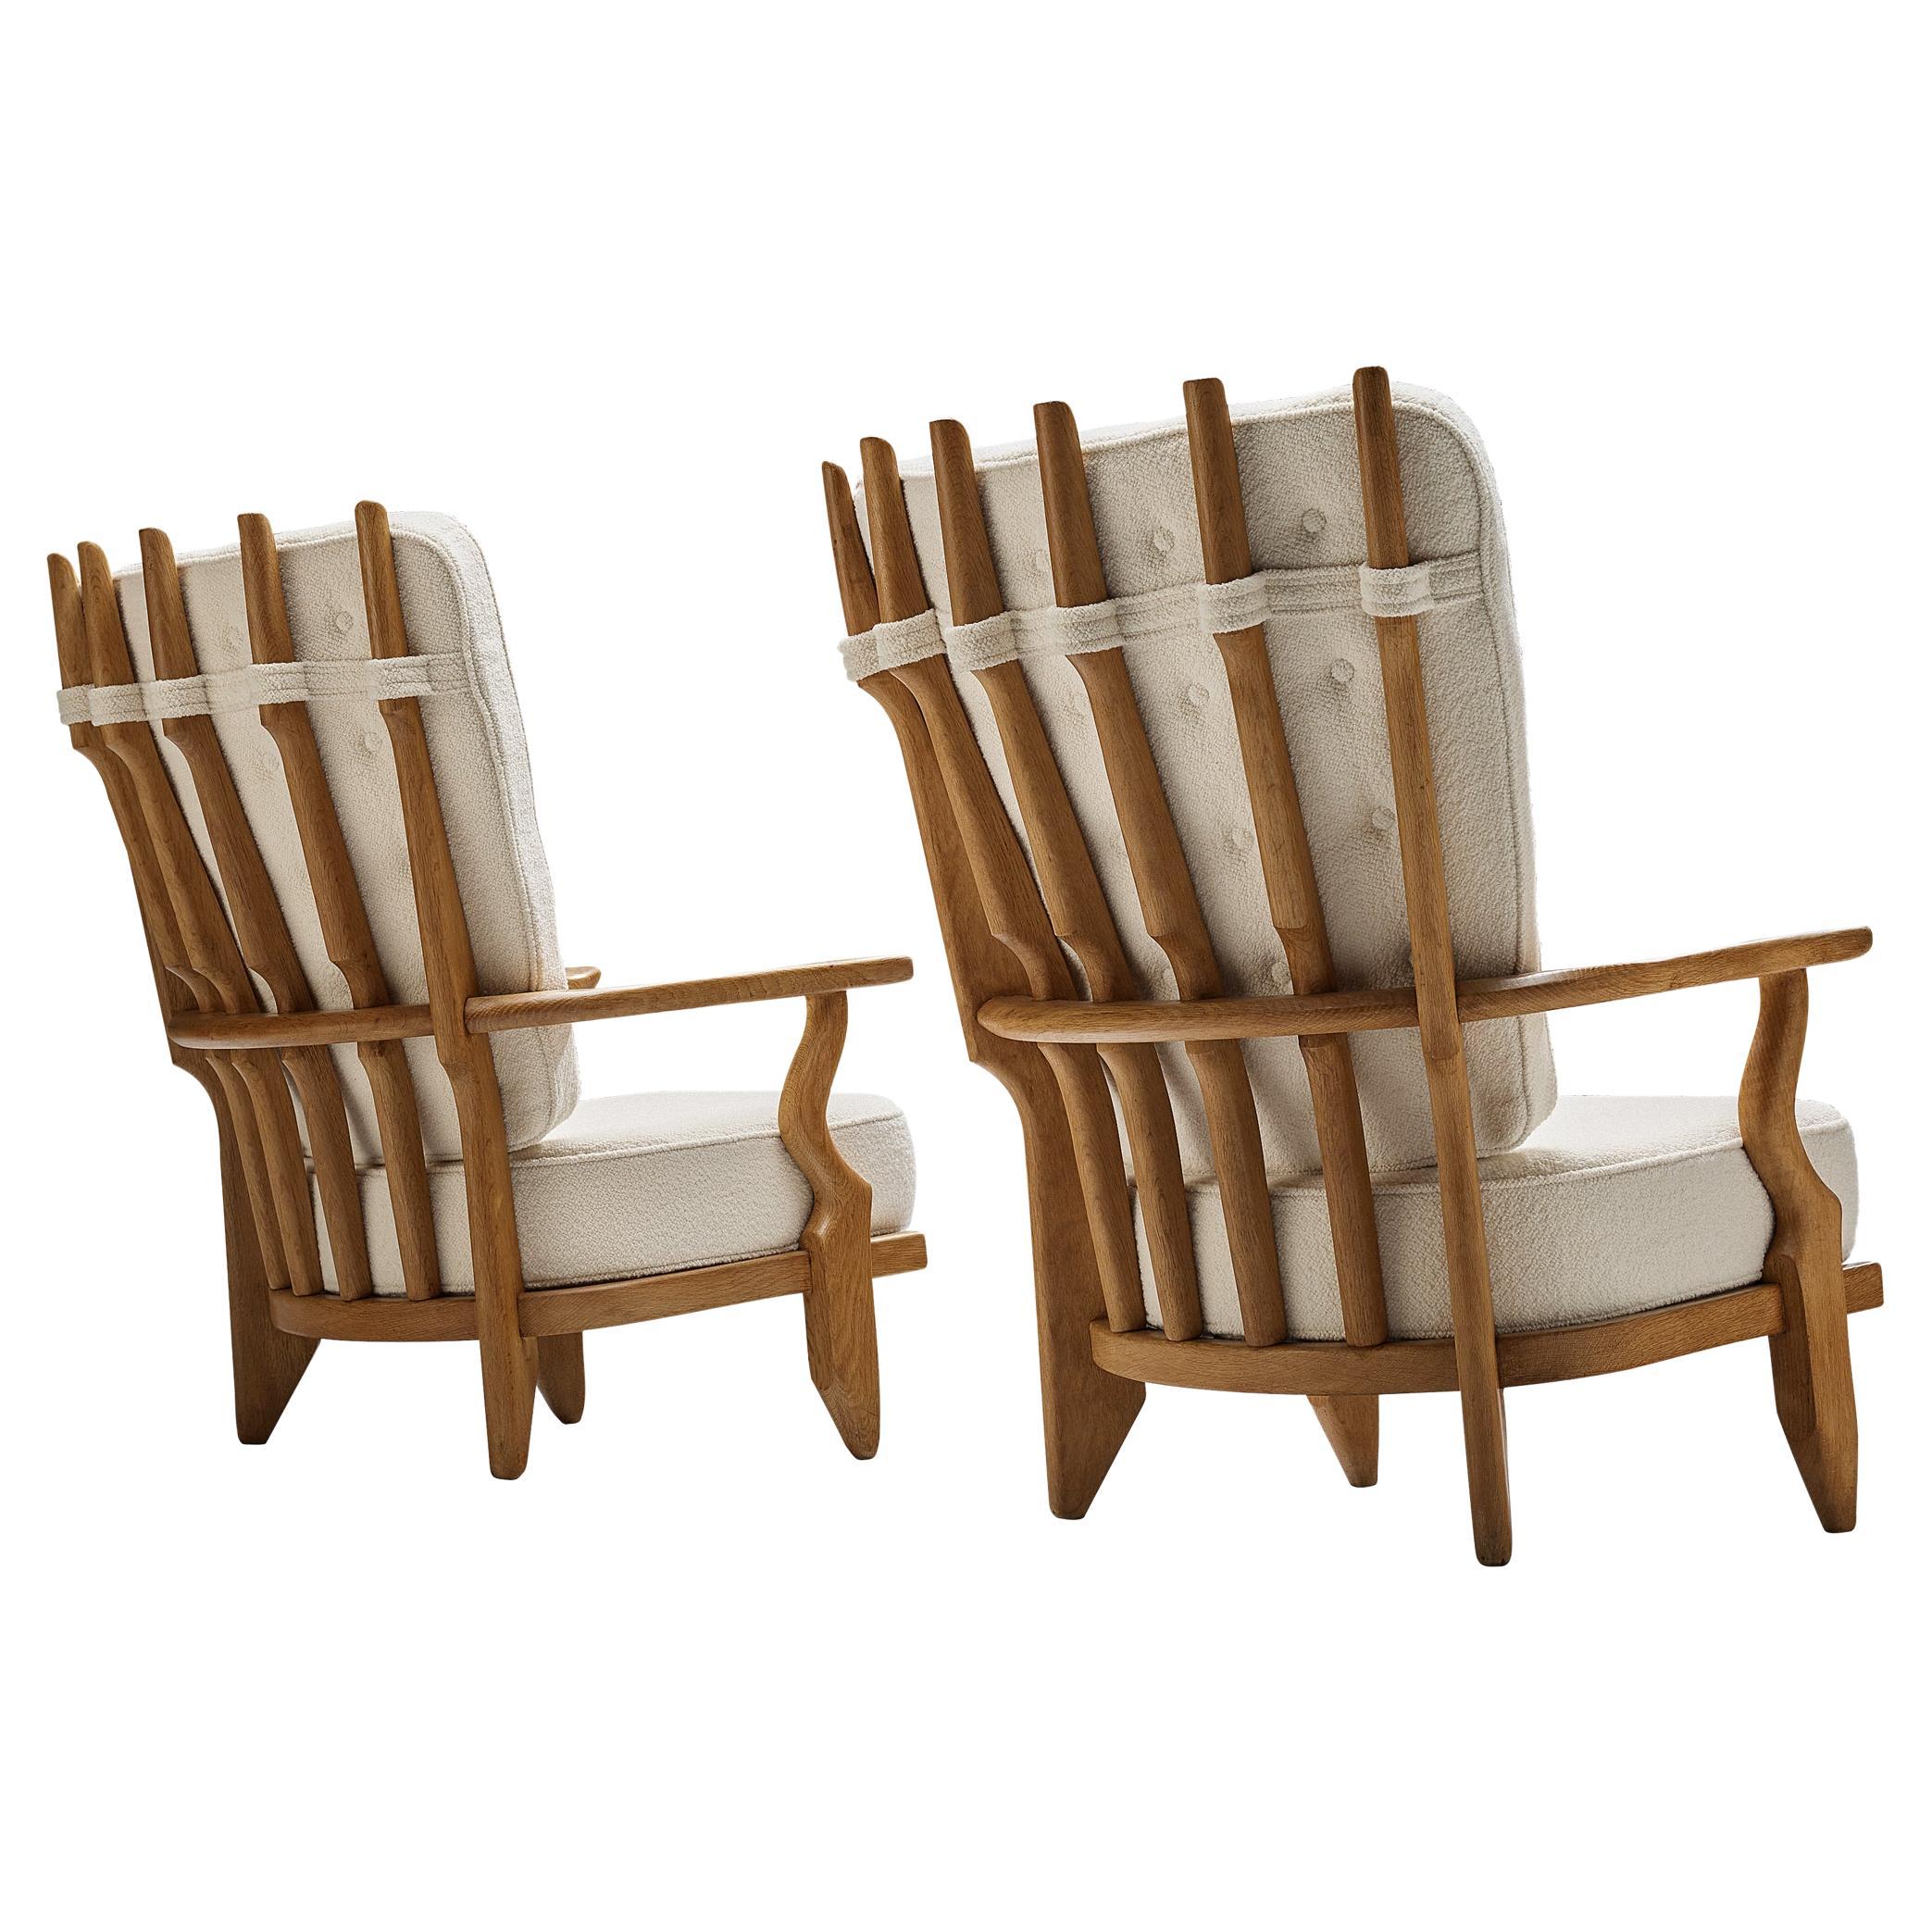 Private Listing for Olga: Pair Guillerme & Chambron 'Grand Repos' Lounge Chairs